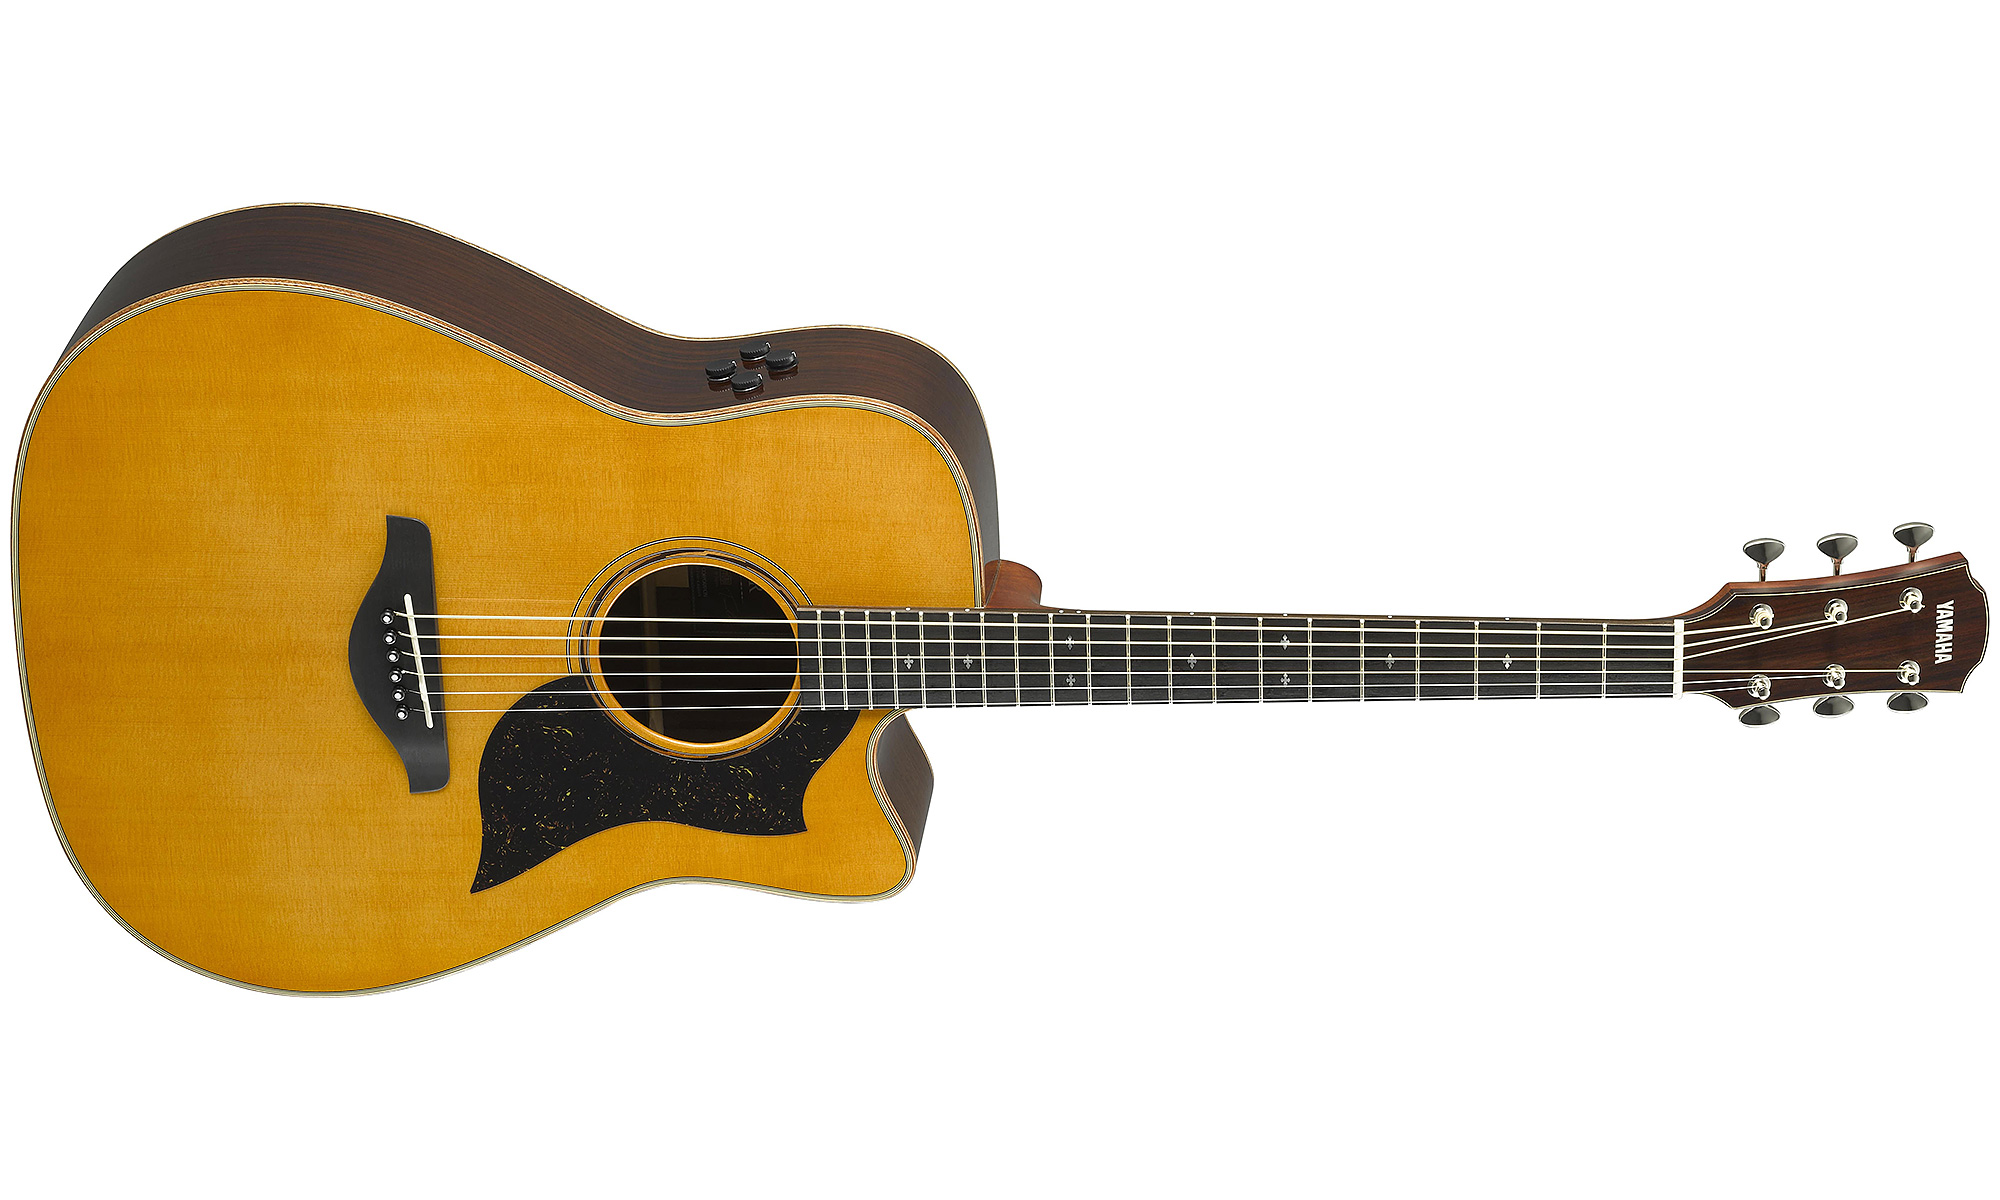 Yamaha A5r Are Vn Dreadnought Cw Epicea Palissandre Eb - Vintage Natural - Guitarra electro acustica - Variation 1